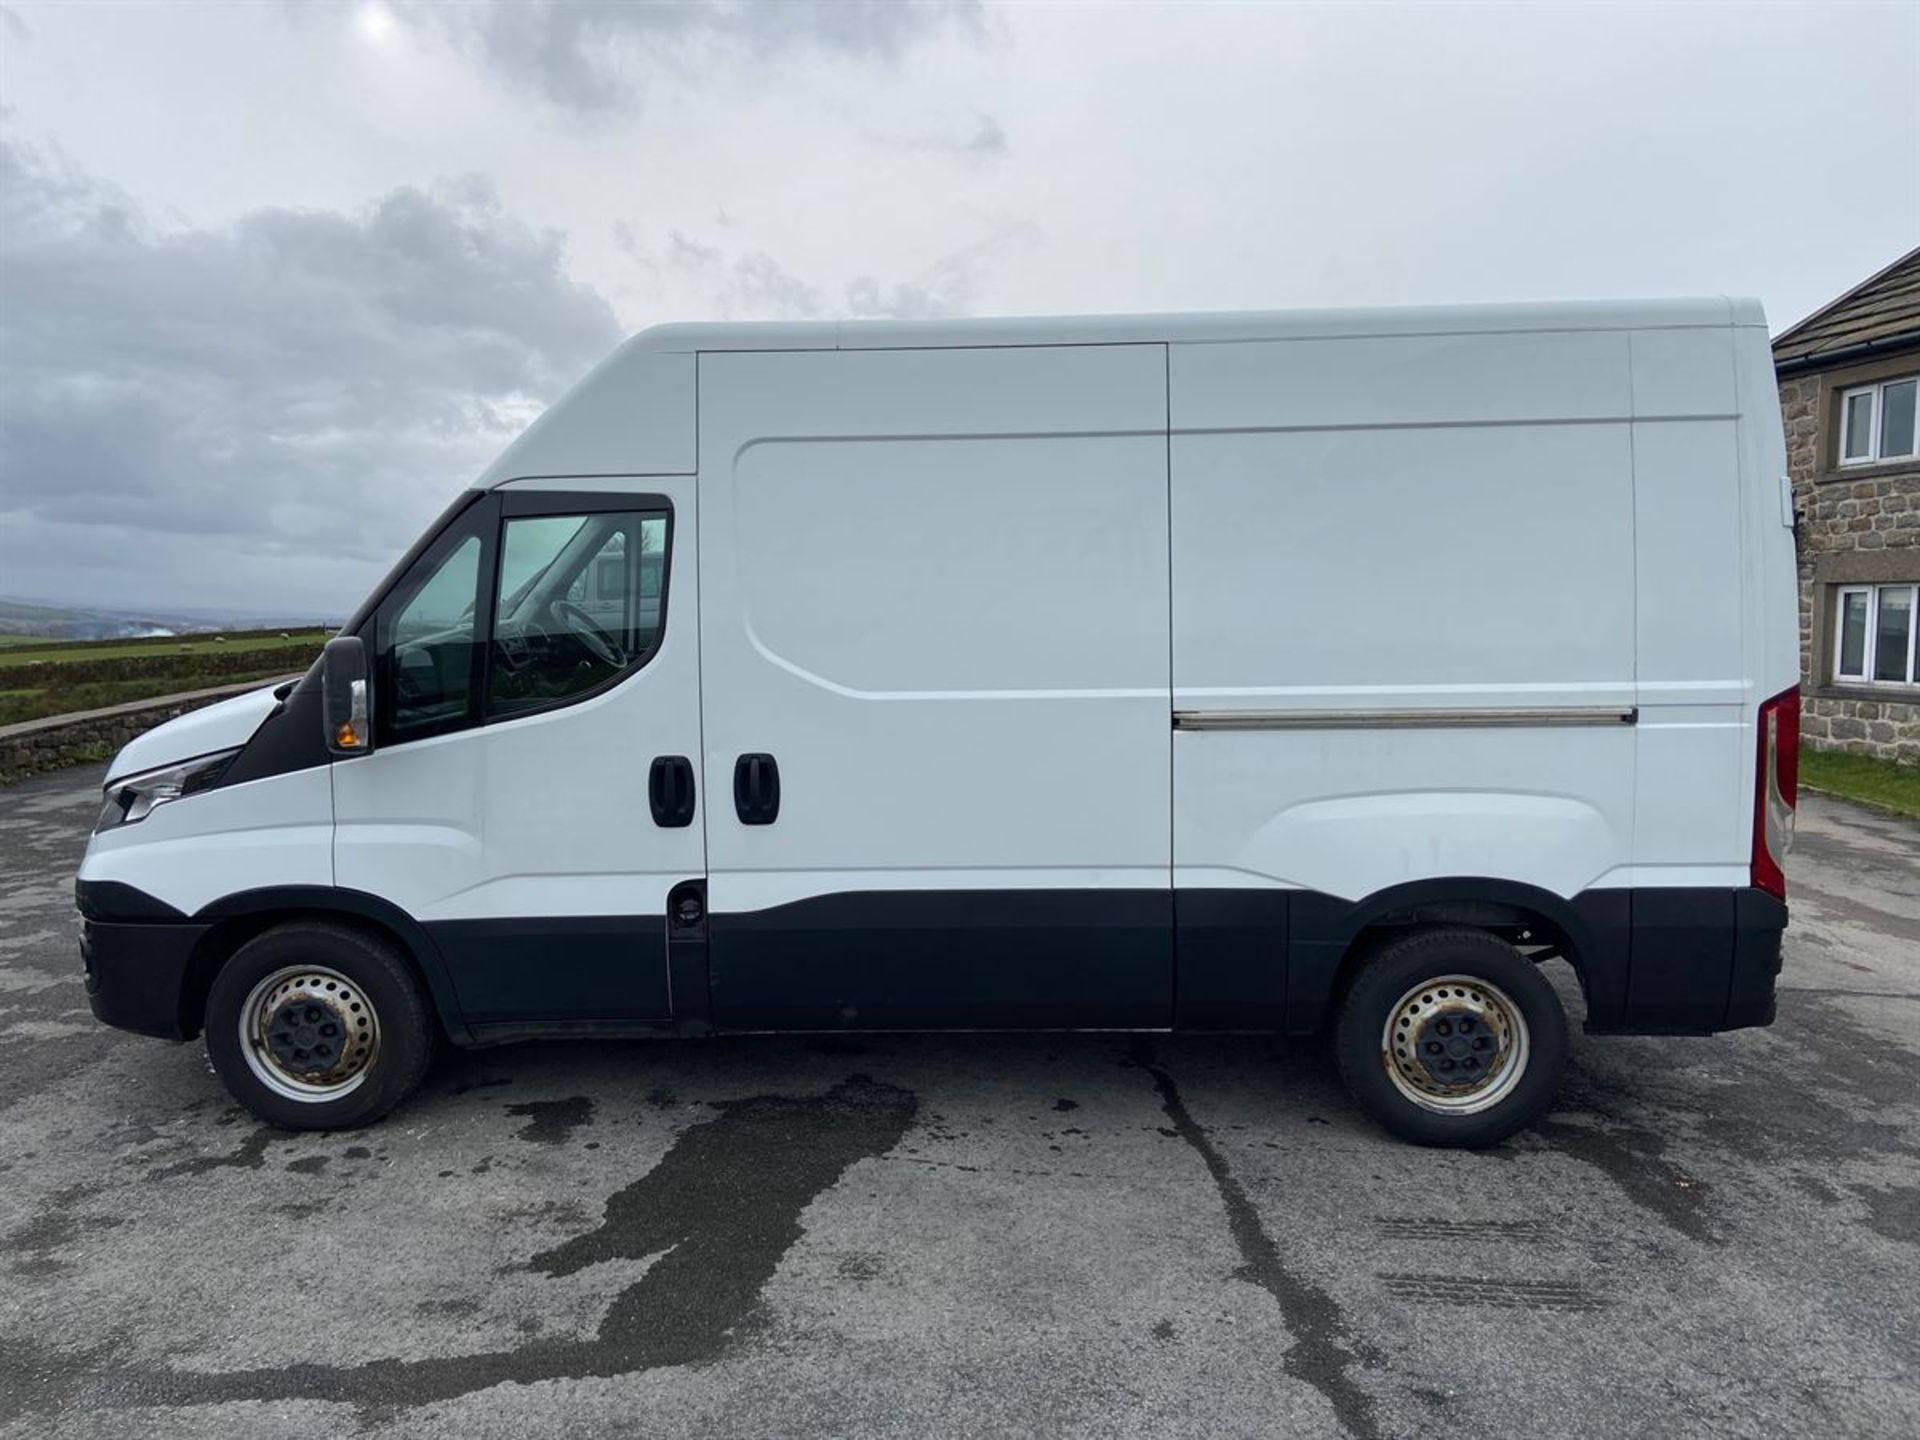 20105/65 IVECO DAILY 35S13 DIESEL 2.3 HIGH ROOF VAN 3520 WB (2287 cc) - Image 6 of 12